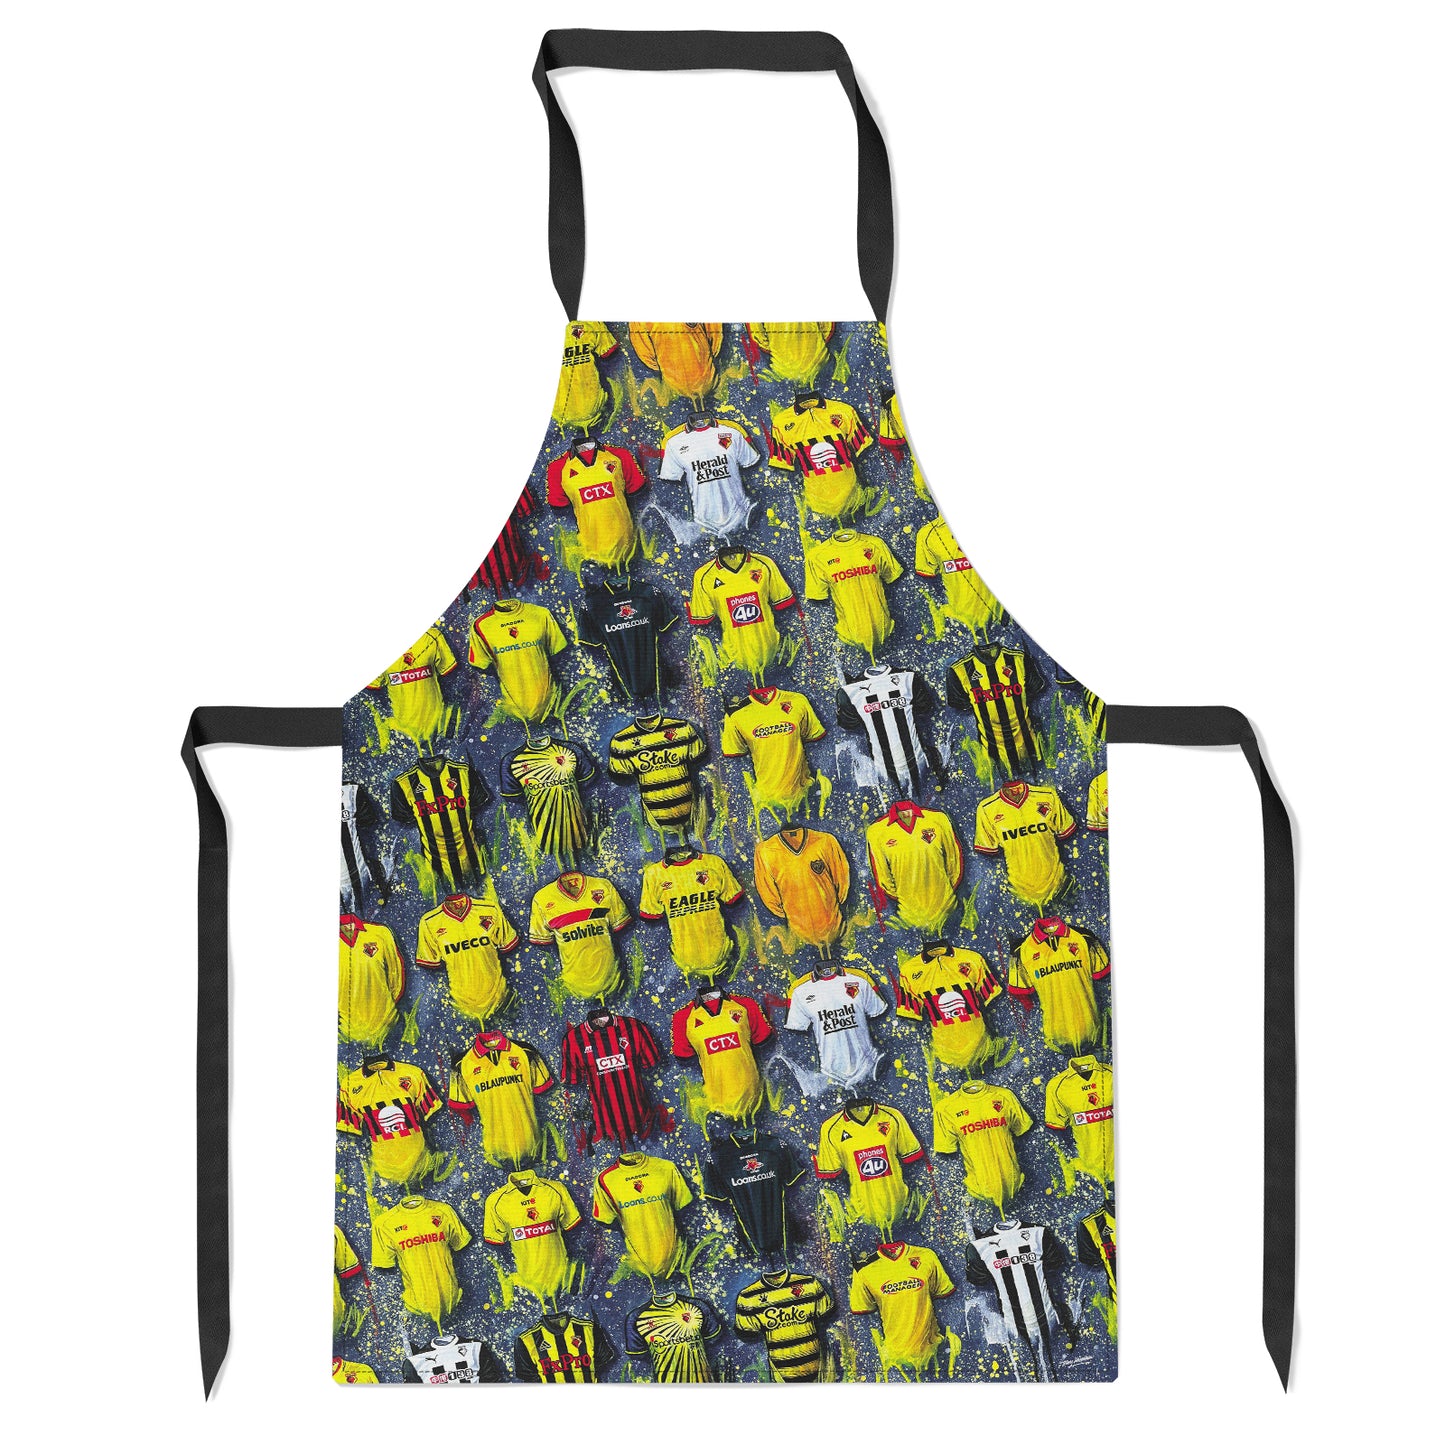 Watford Shirts - A Hornet's Collection Apron